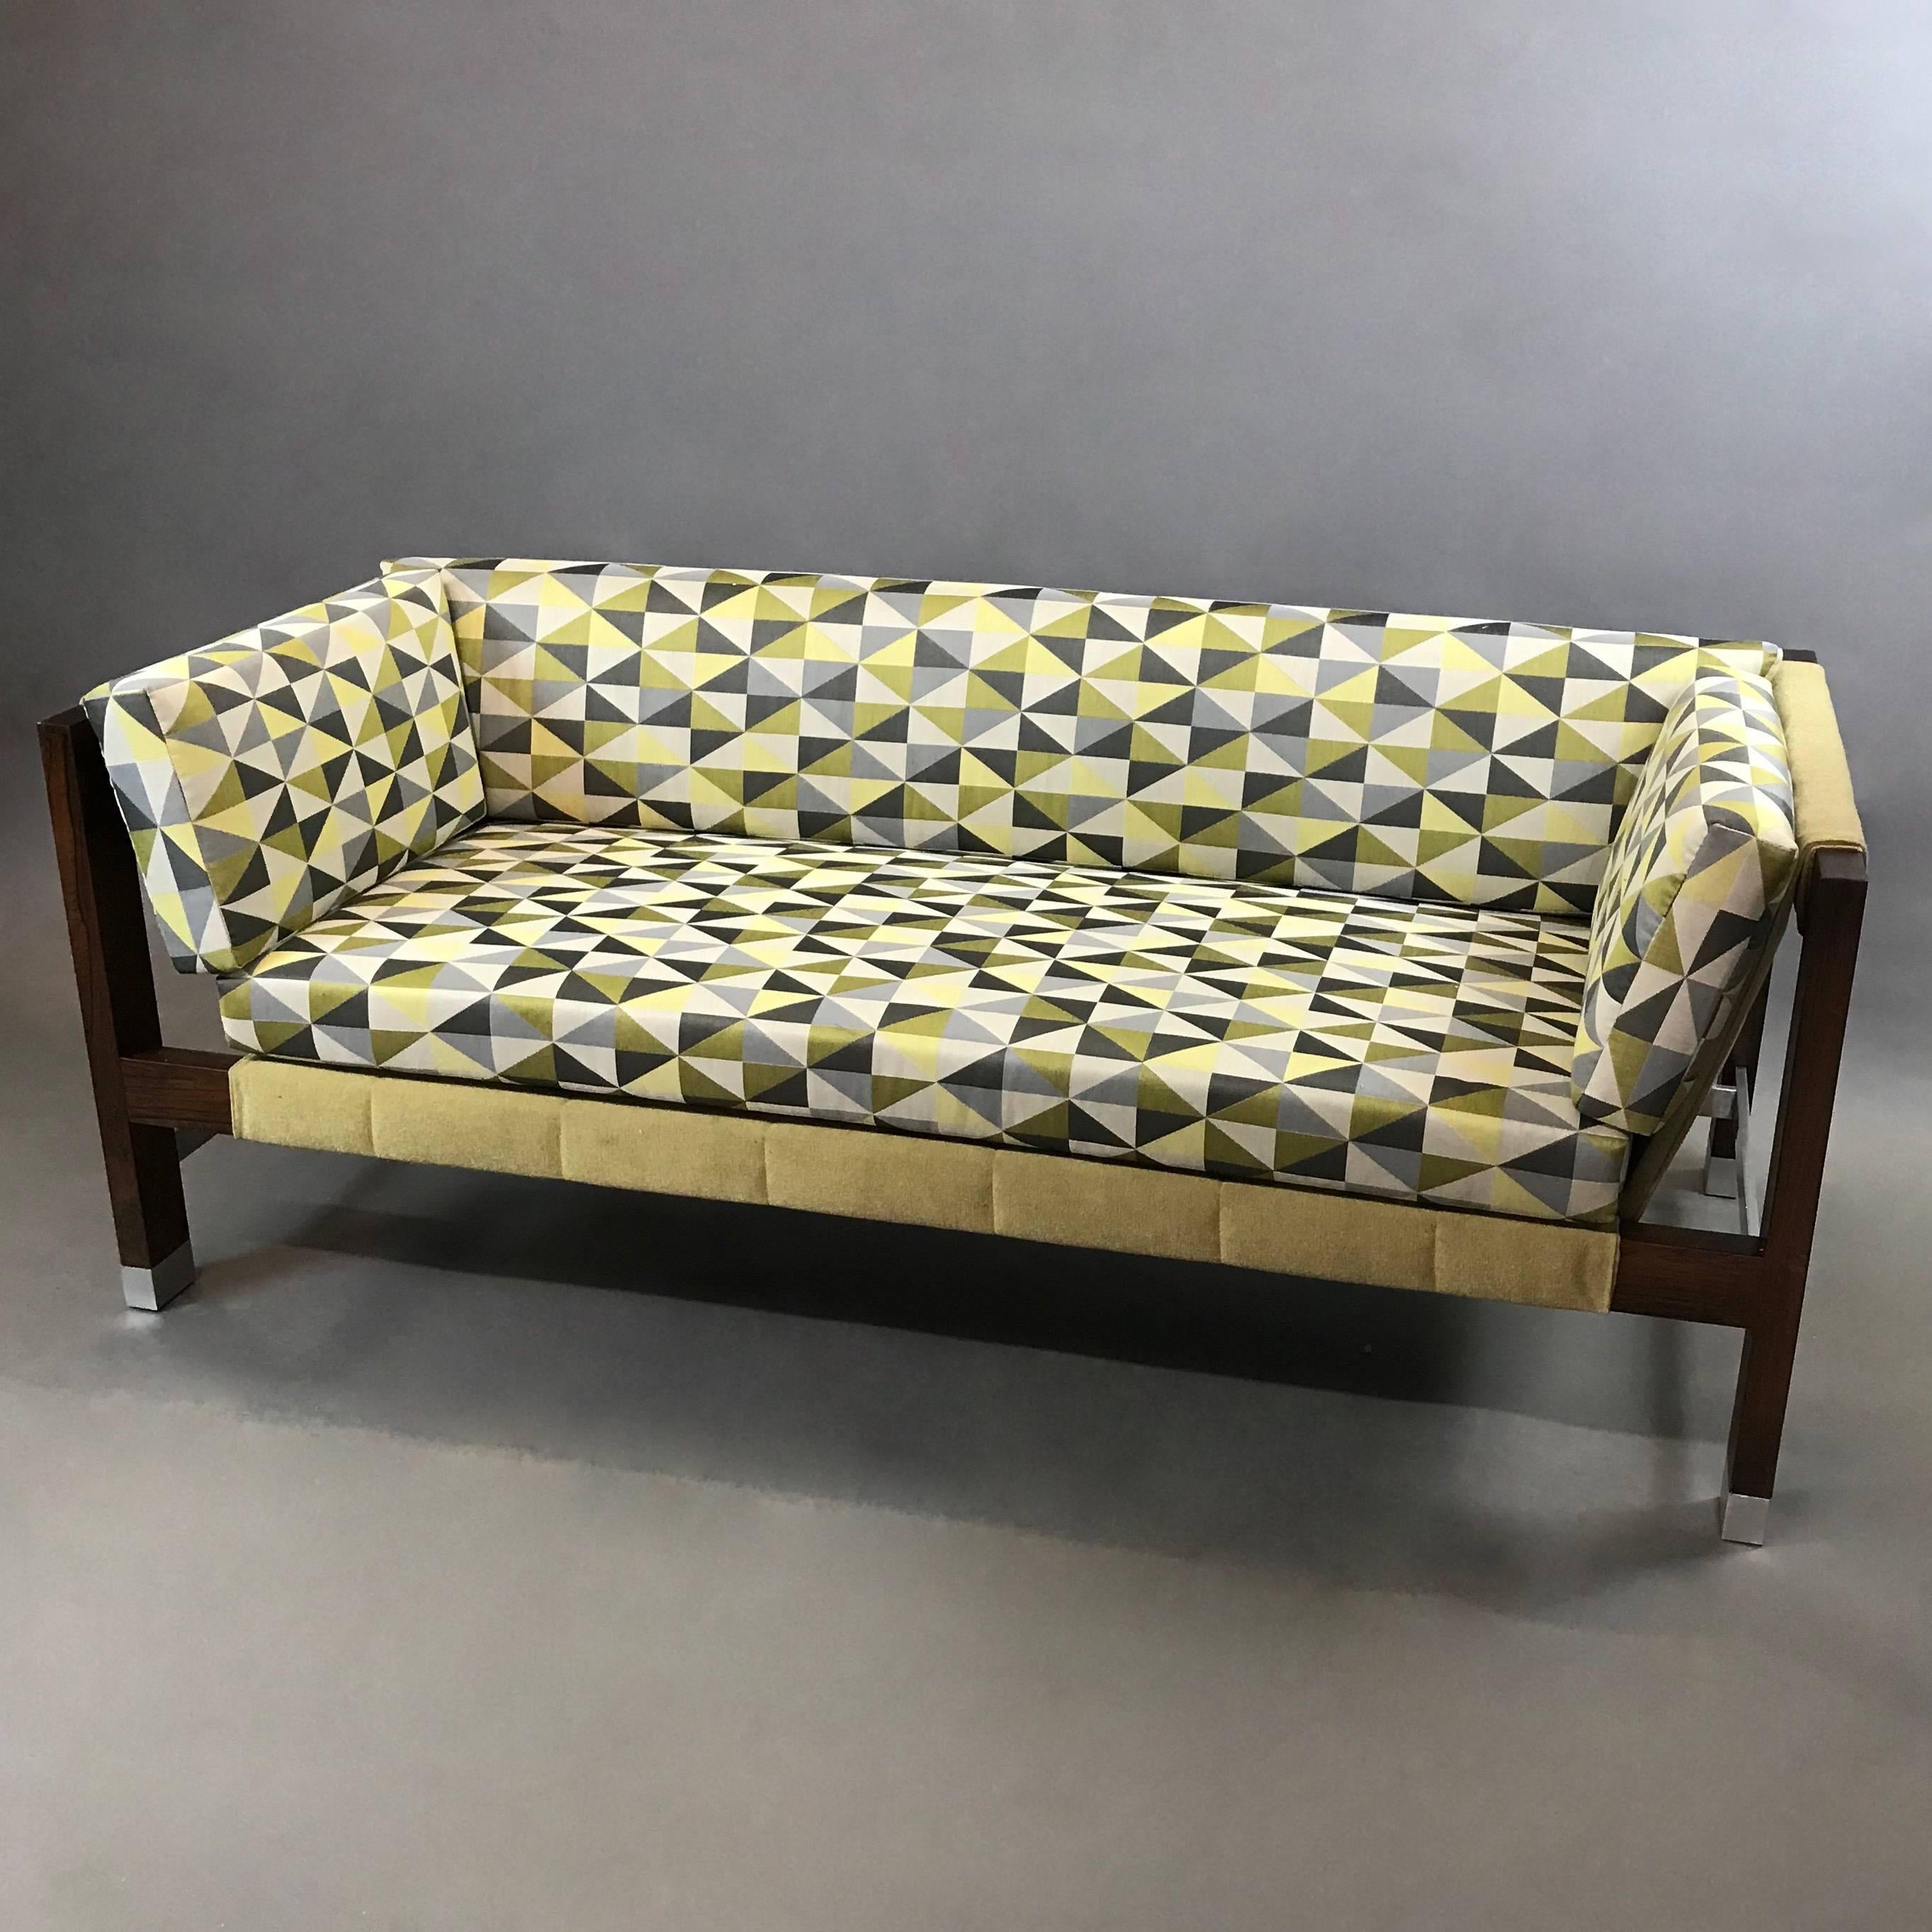 Mid-Century Modern, low-profile, two-tone, sling sofa by Jack Cartwright features a rosewood and aluminum frame with chartreuse mohair sling and contrasting greens, grays and white, op-art patterned, linen cotton blend cushions resting in the sling.